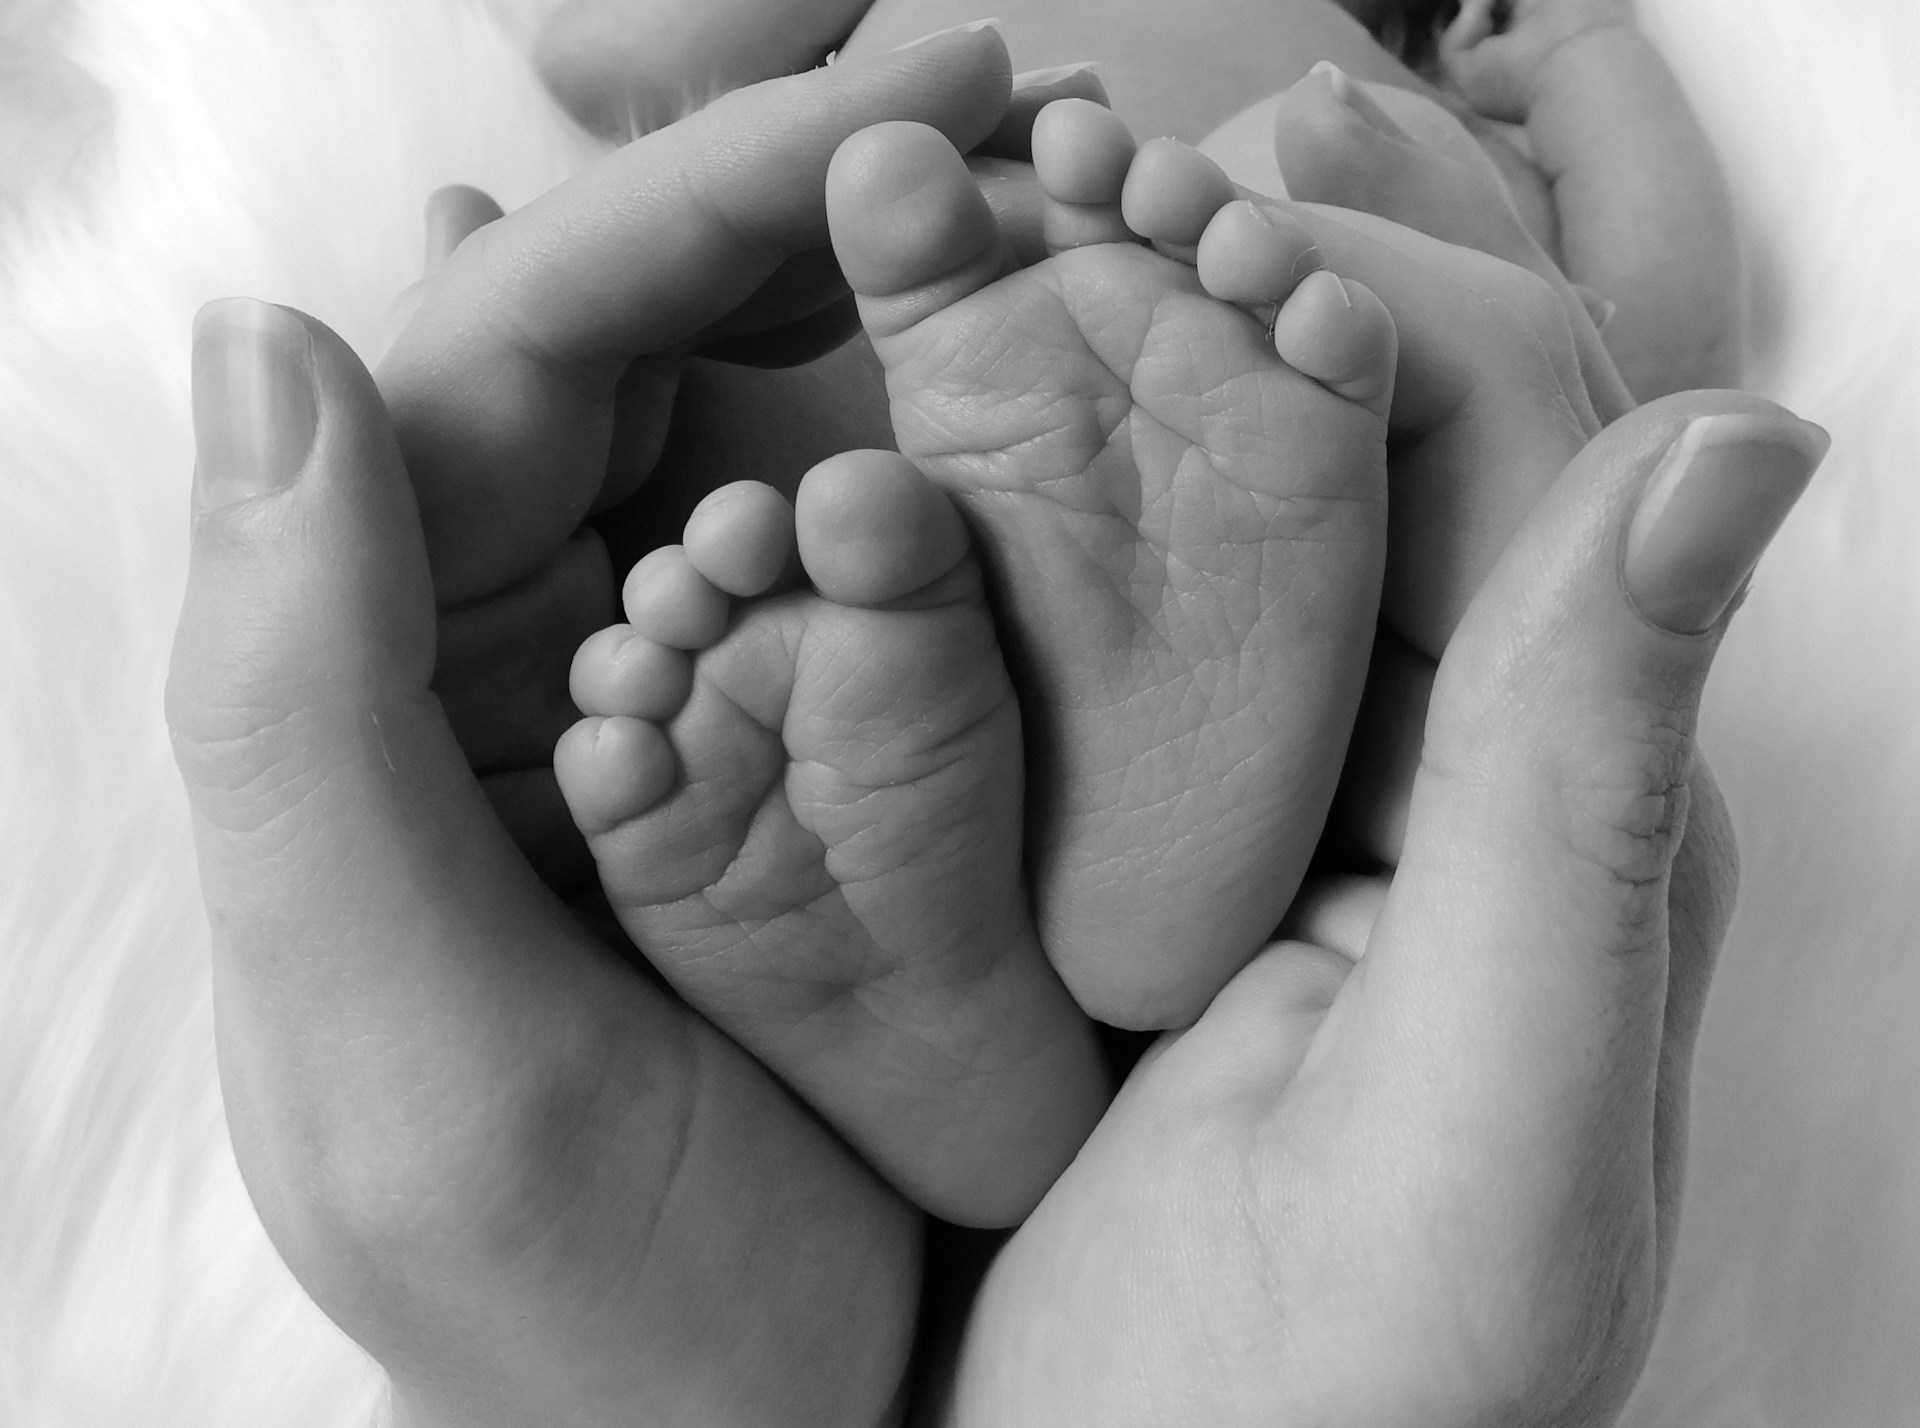 Hands holding baby feet.